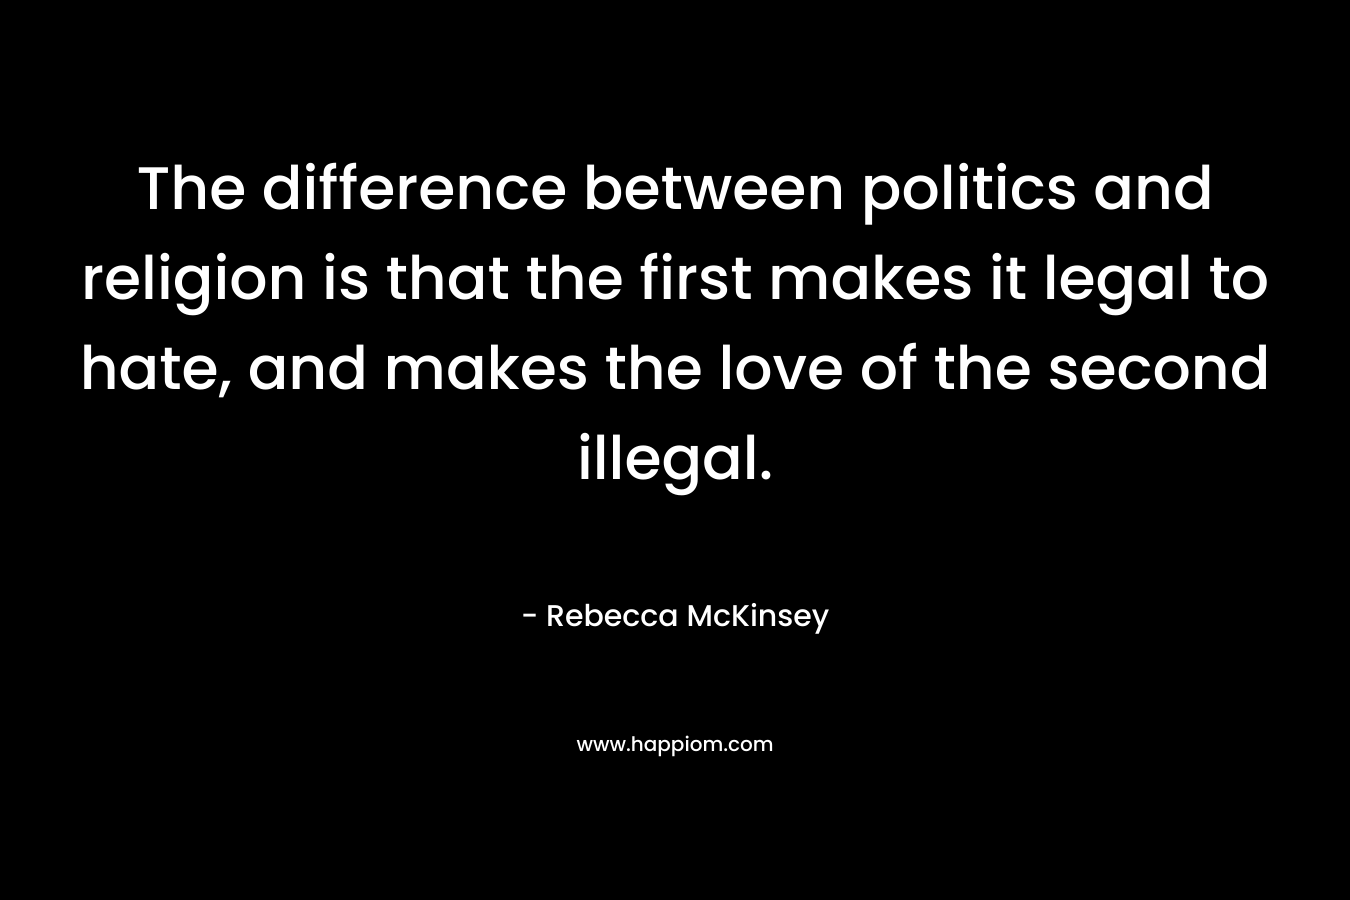 The difference between politics and religion is that the first makes it legal to hate, and makes the love of the second illegal.